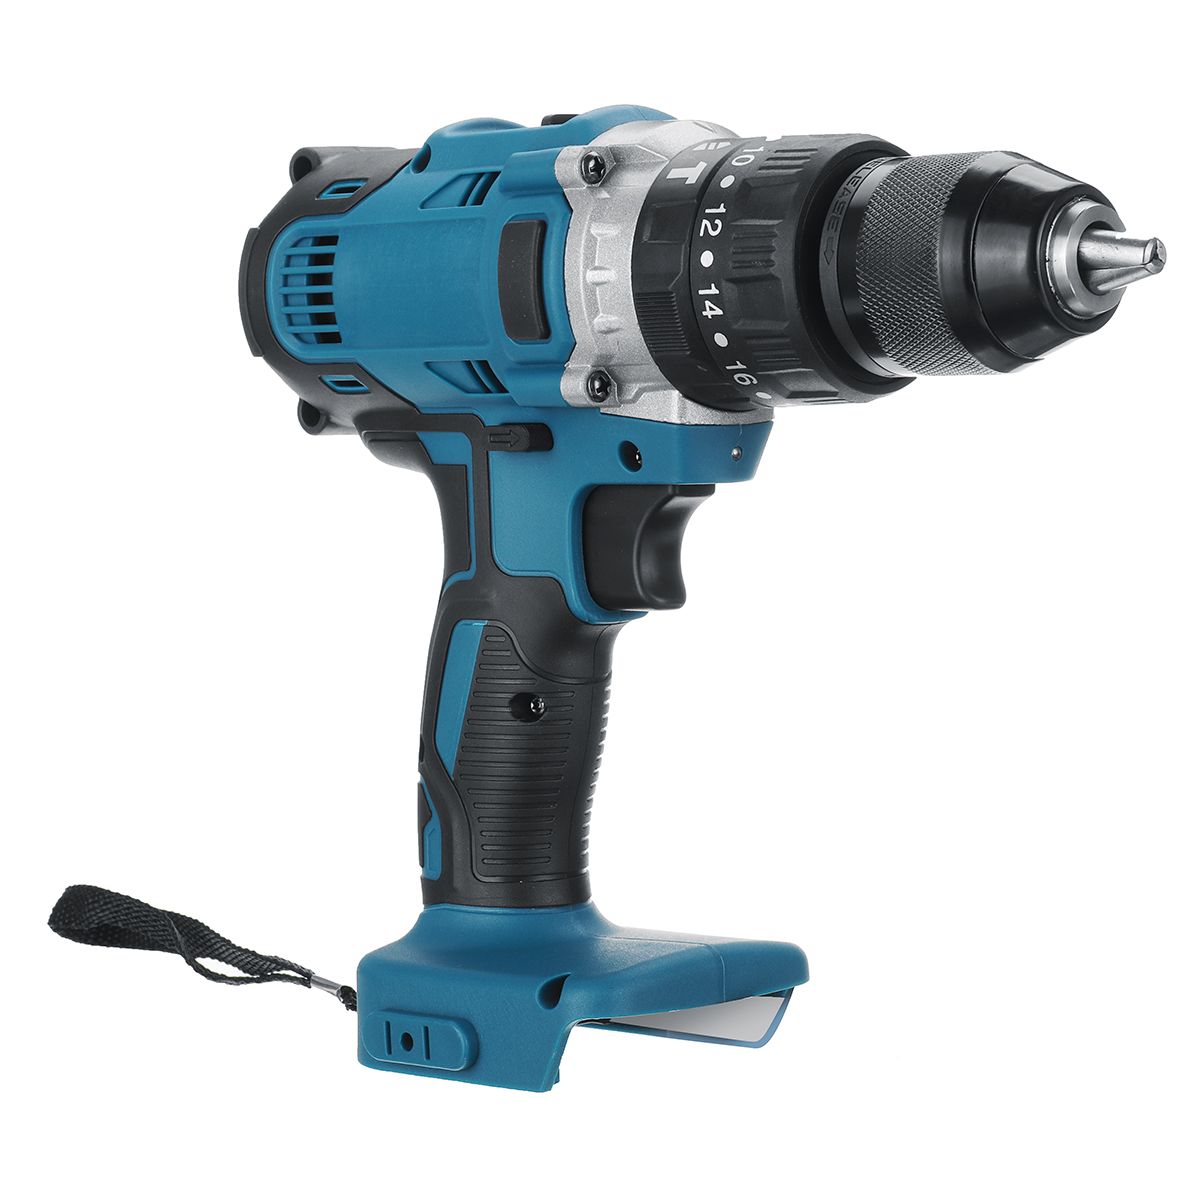 18V-95Nm-Cordless-Impact-Drill-2-Speeds-Electric-Screwdriver-For-18V-Makita-Battery-1656476